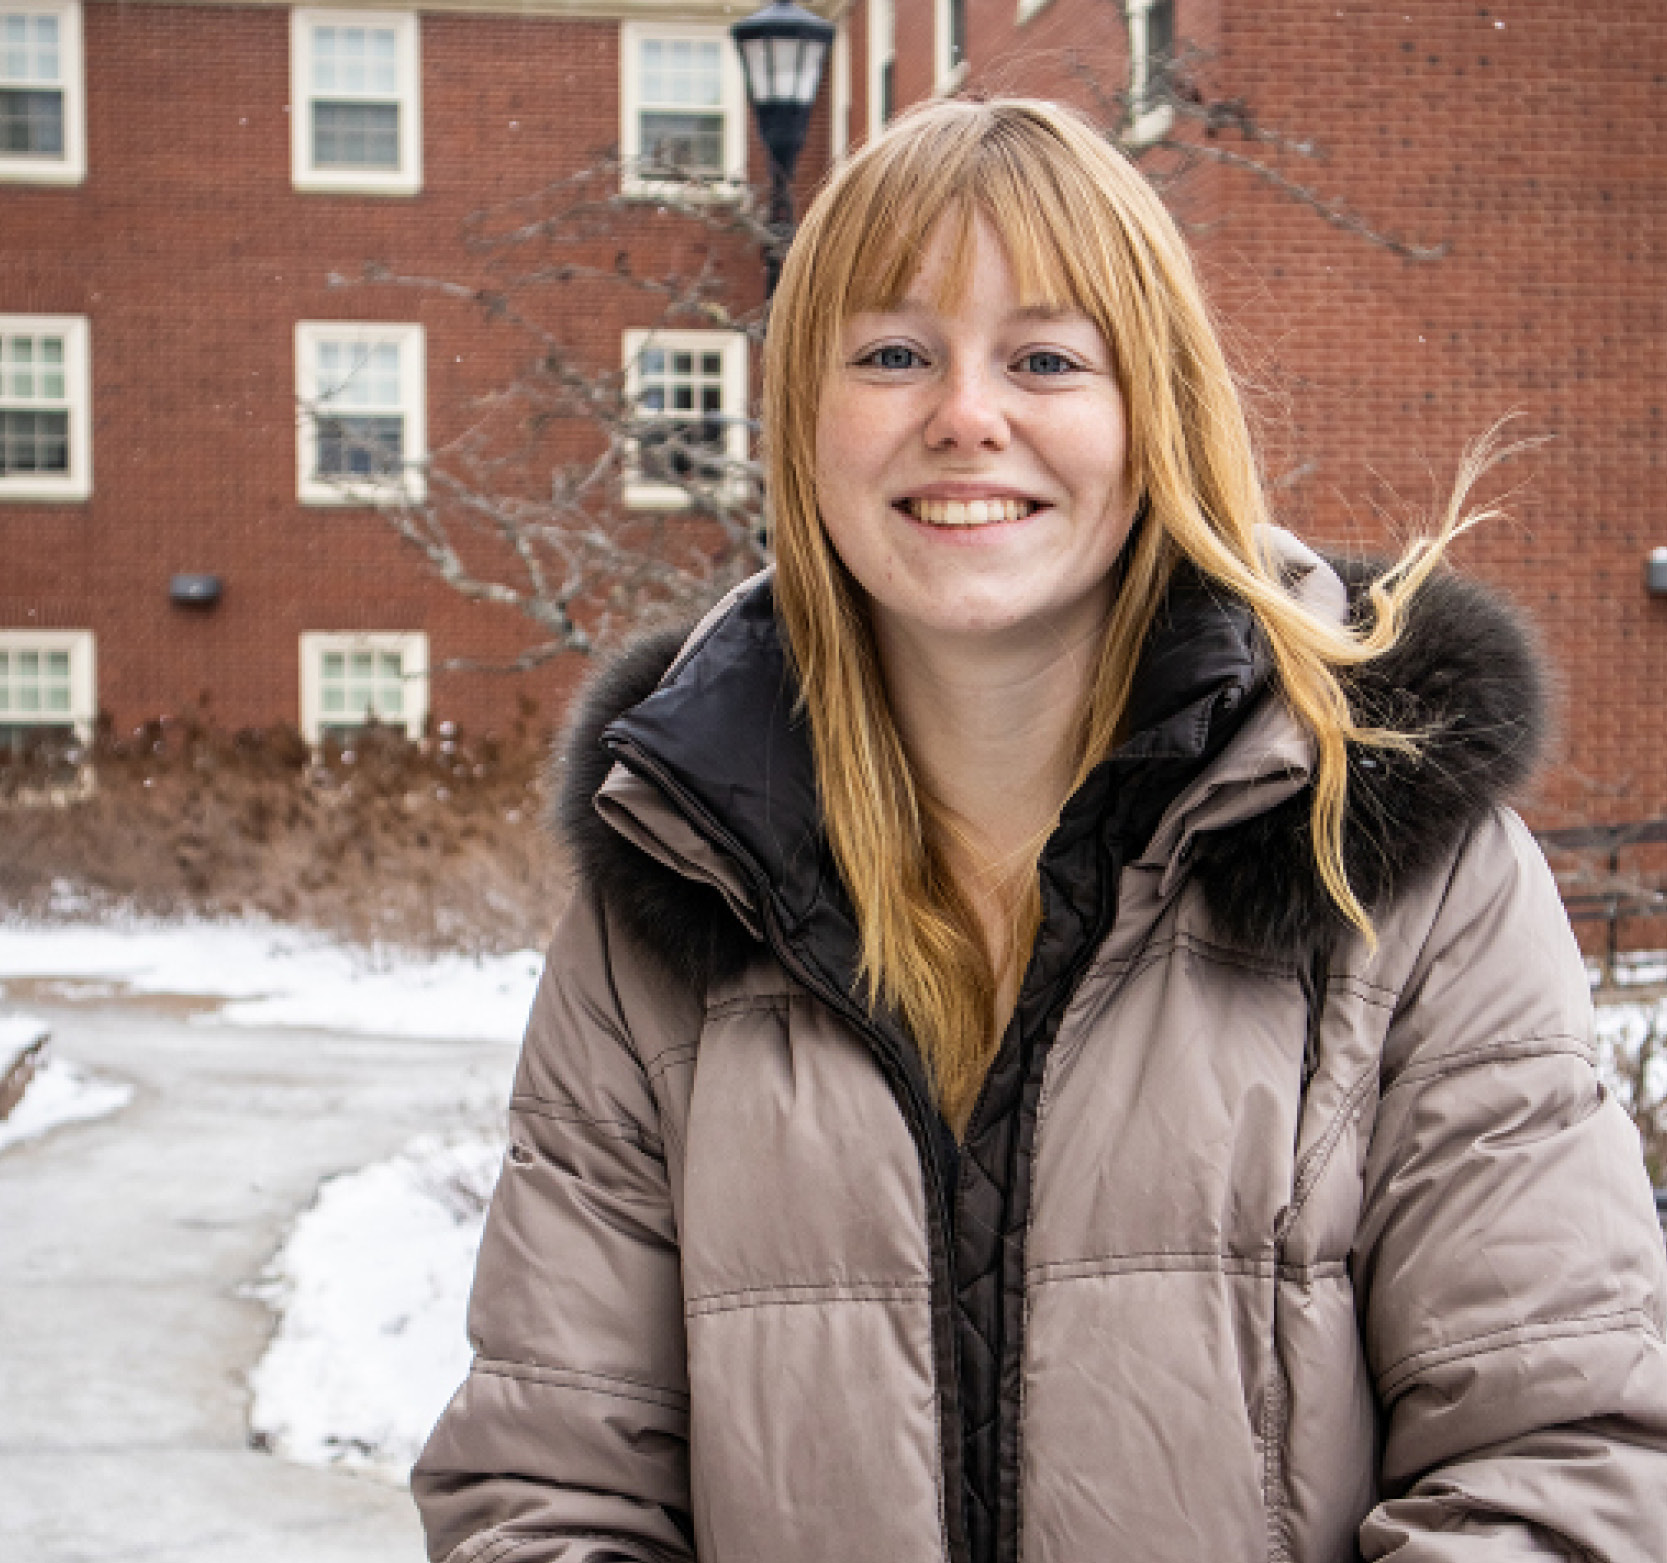 Student intern Laura next to campus buildings in winter